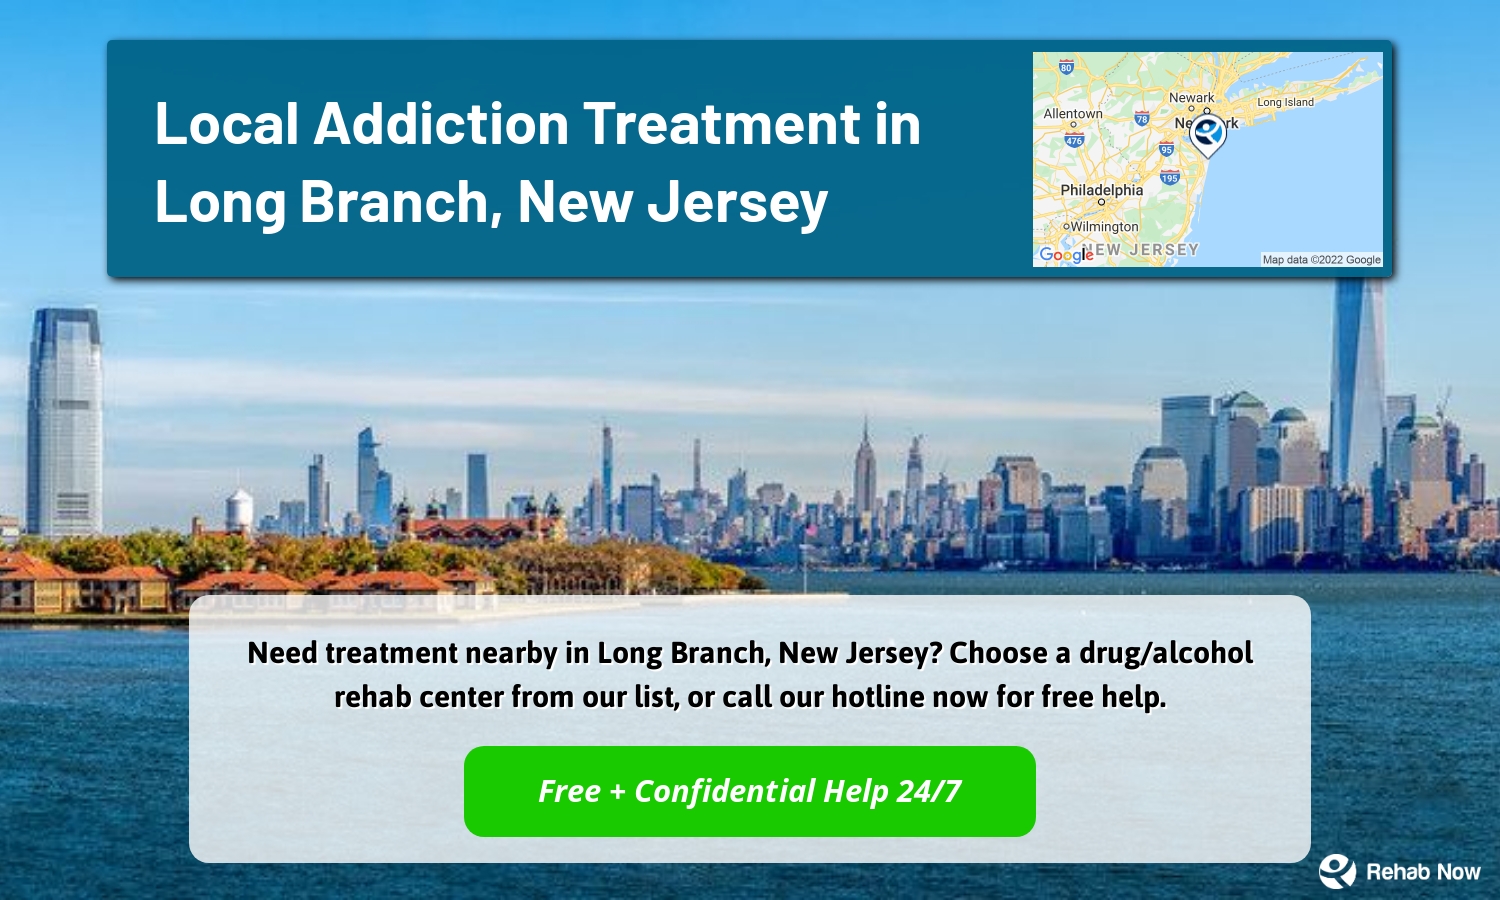 Need treatment nearby in Long Branch, New Jersey? Choose a drug/alcohol rehab center from our list, or call our hotline now for free help.